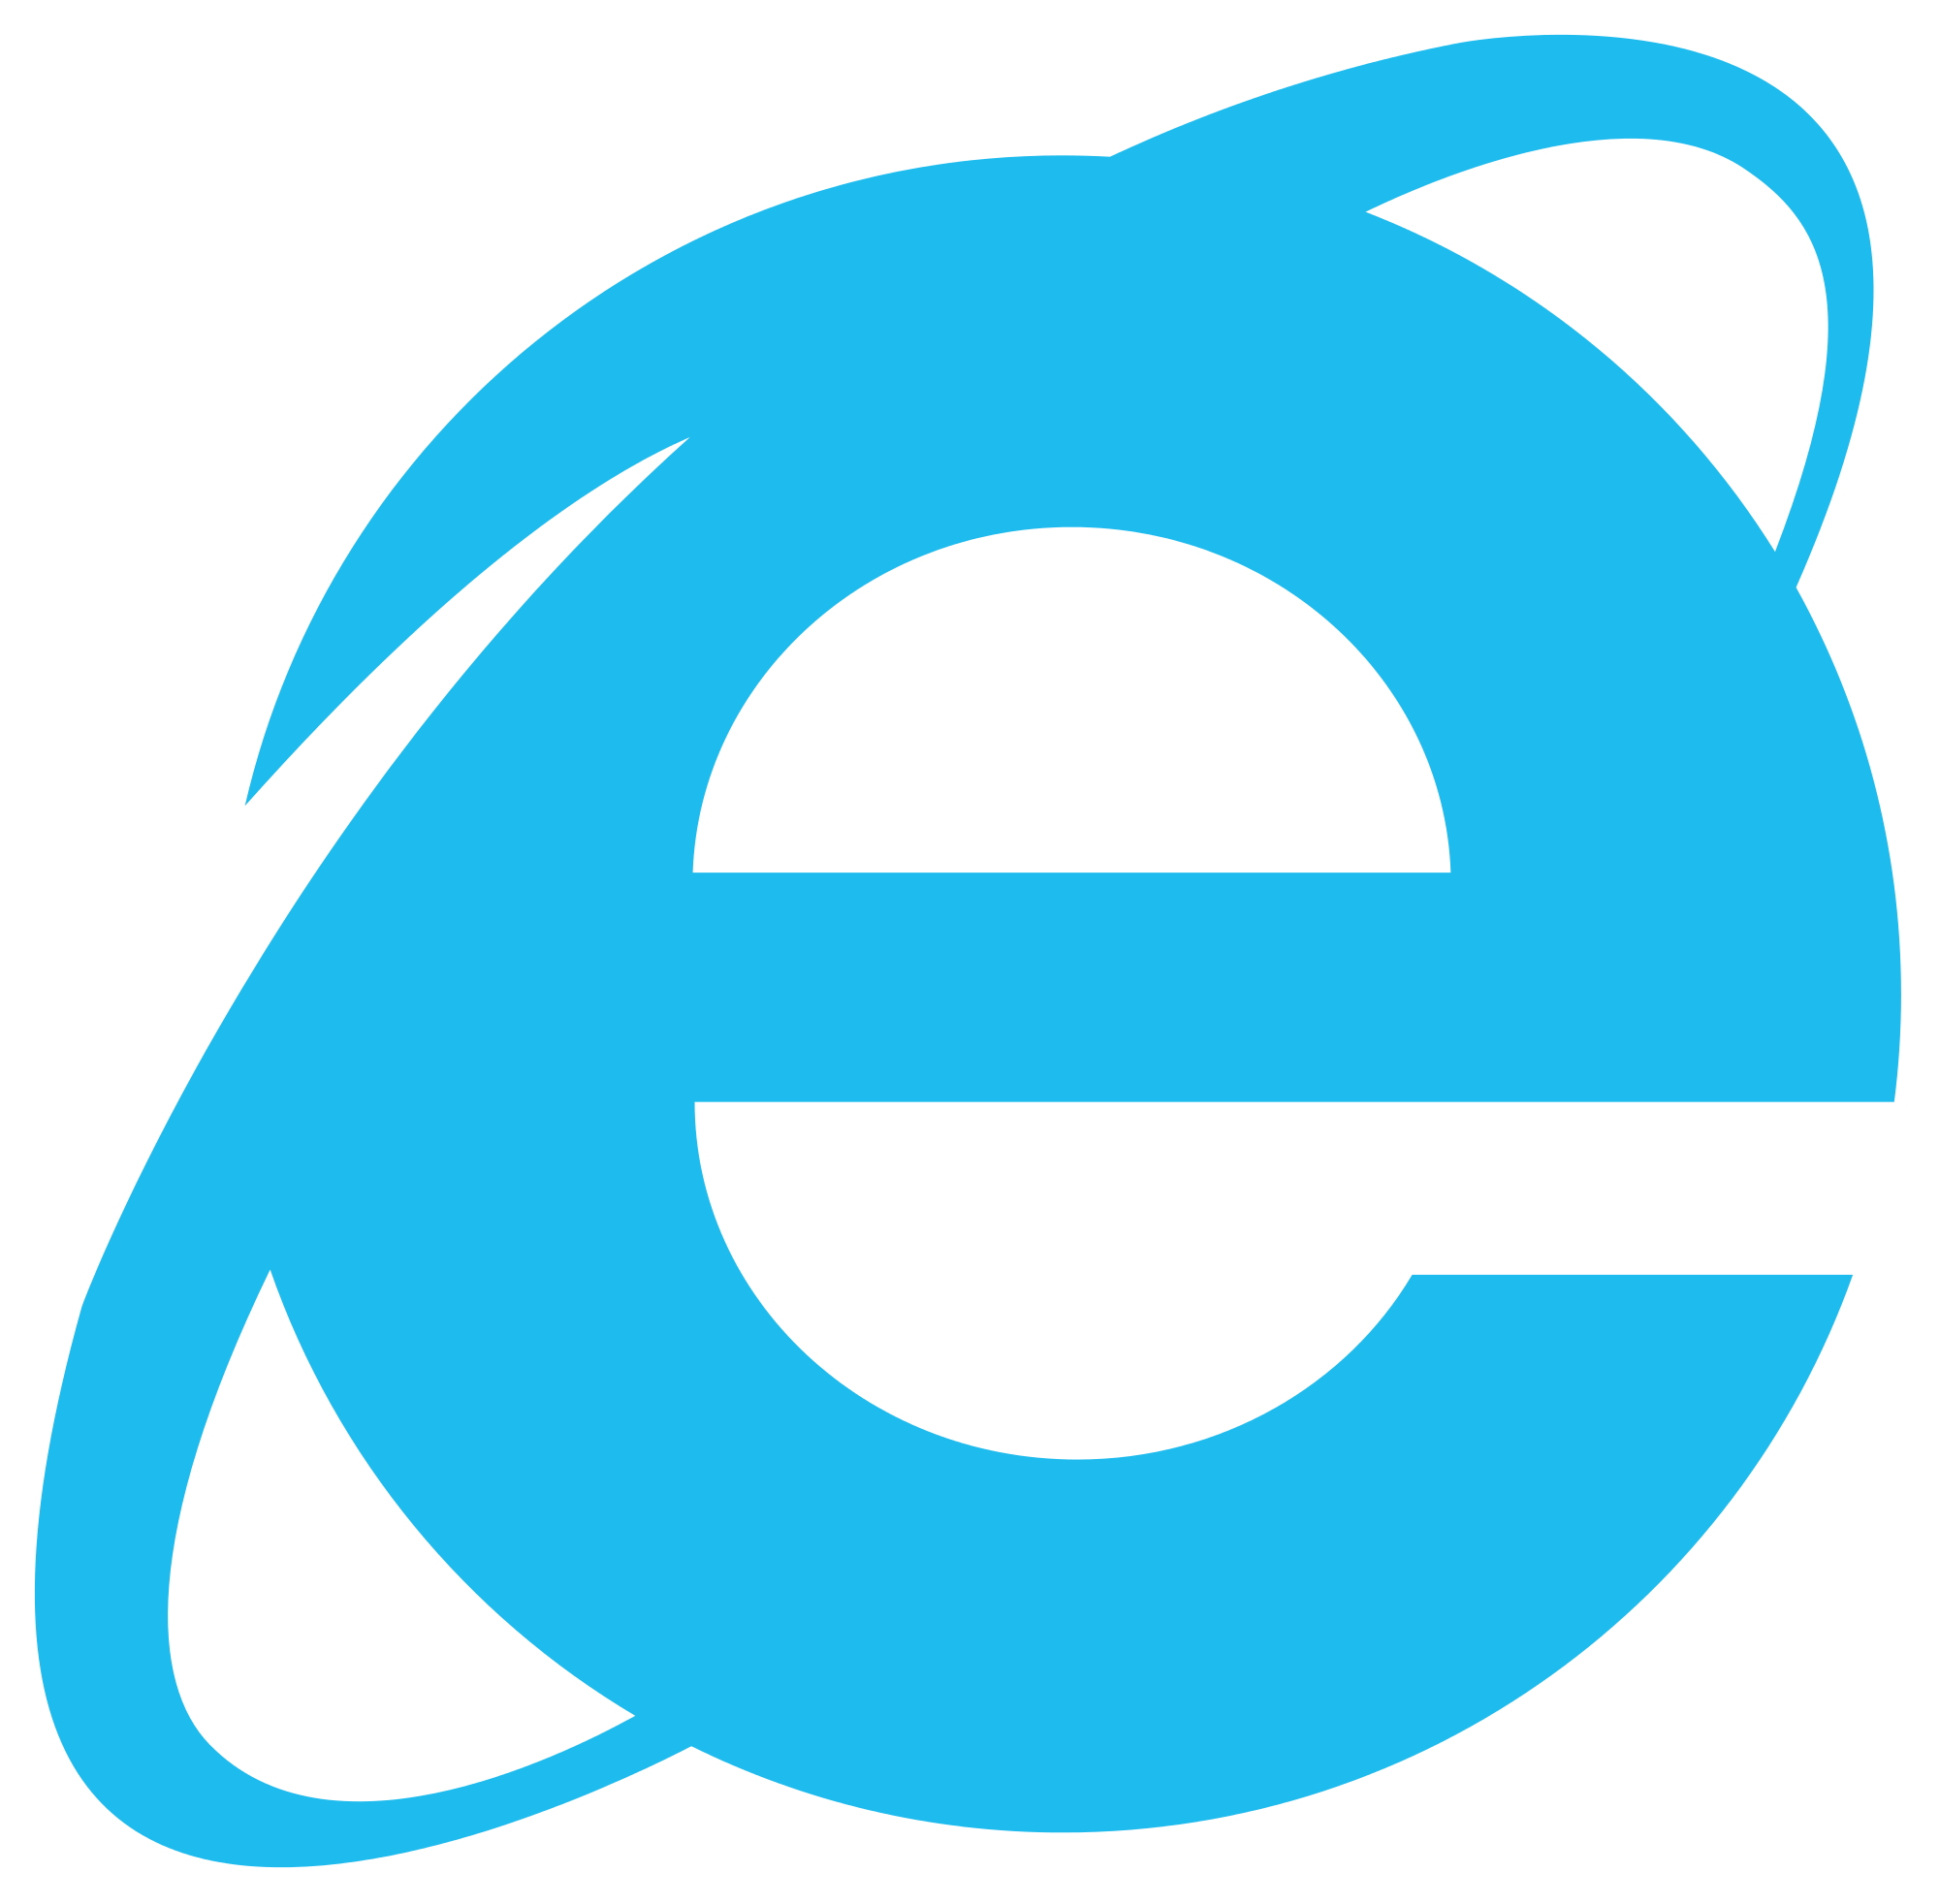 Windows Internet Explorer 10 Logo - Windows Update cause issues with printing for Internet Explorer ...